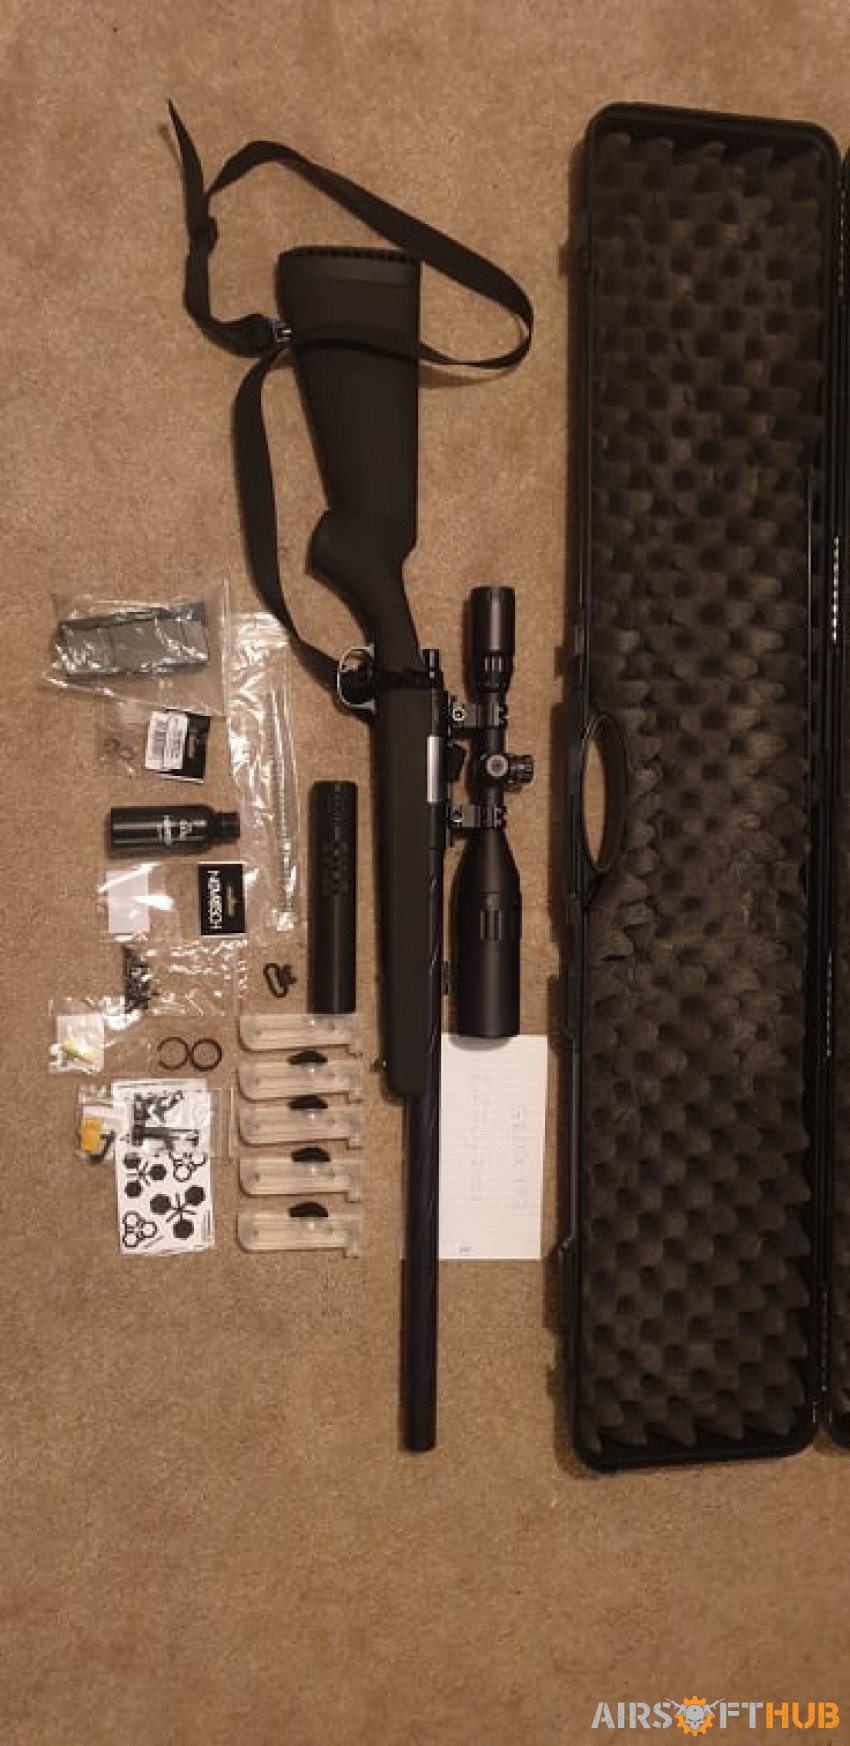 SSG10A1 Full Package - Used airsoft equipment